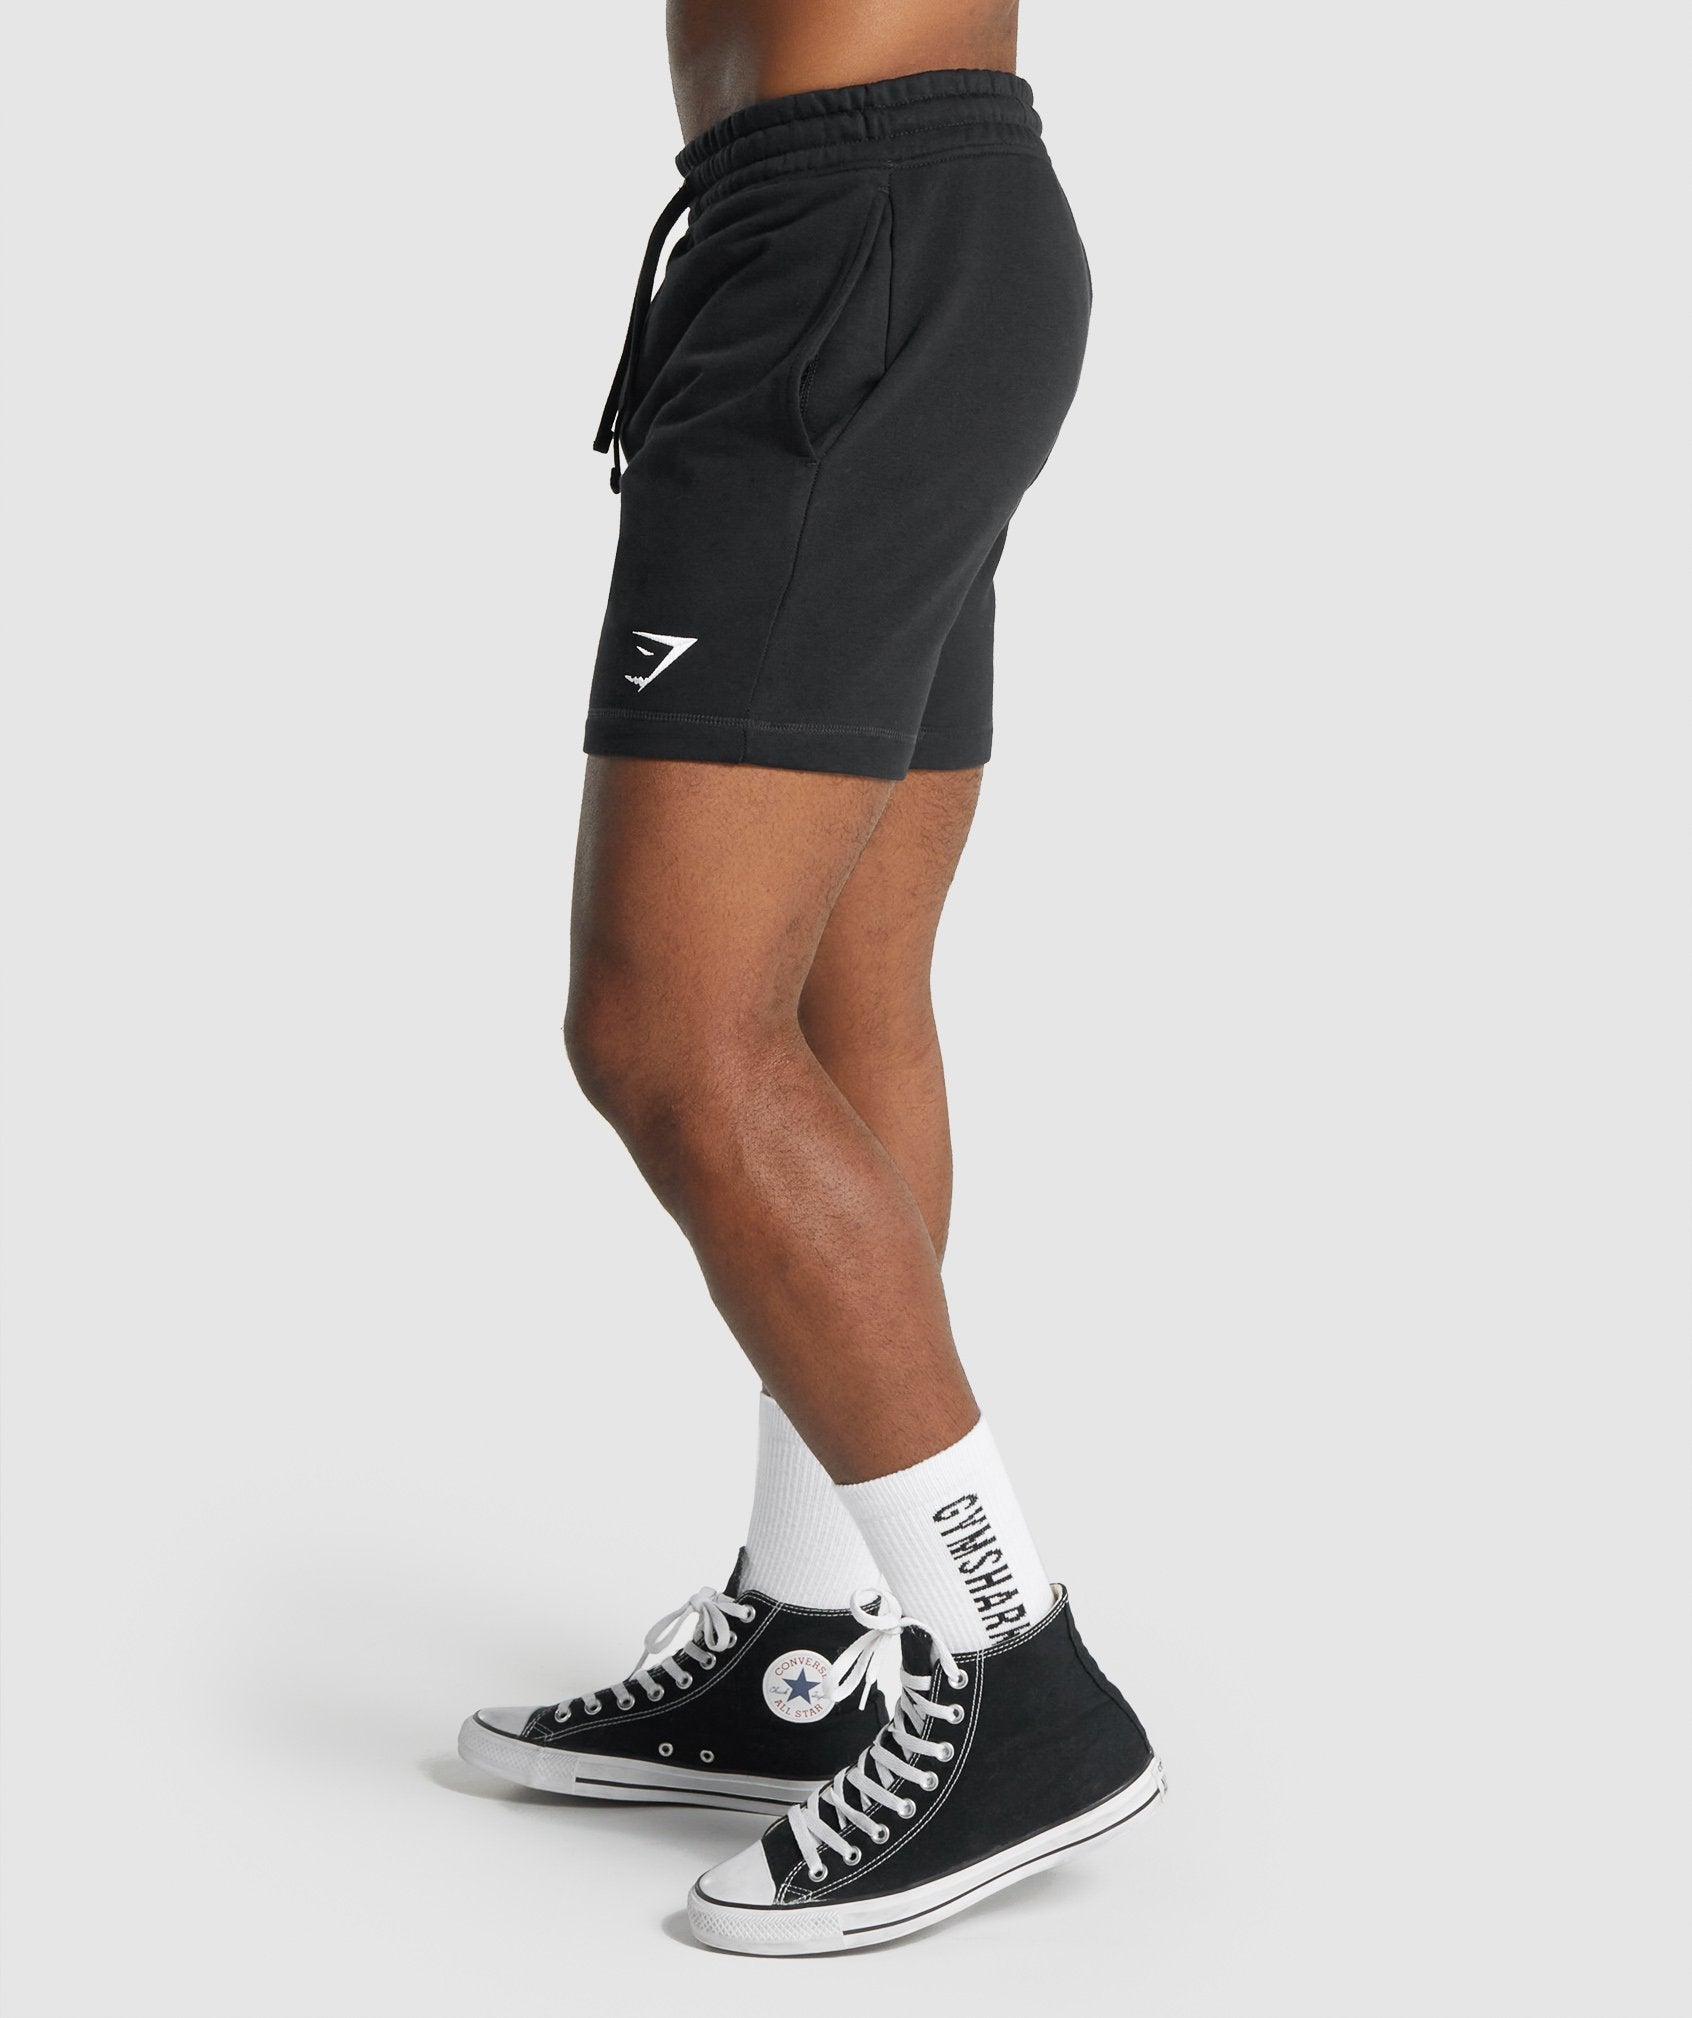 Crest Shorts in Black - view 3